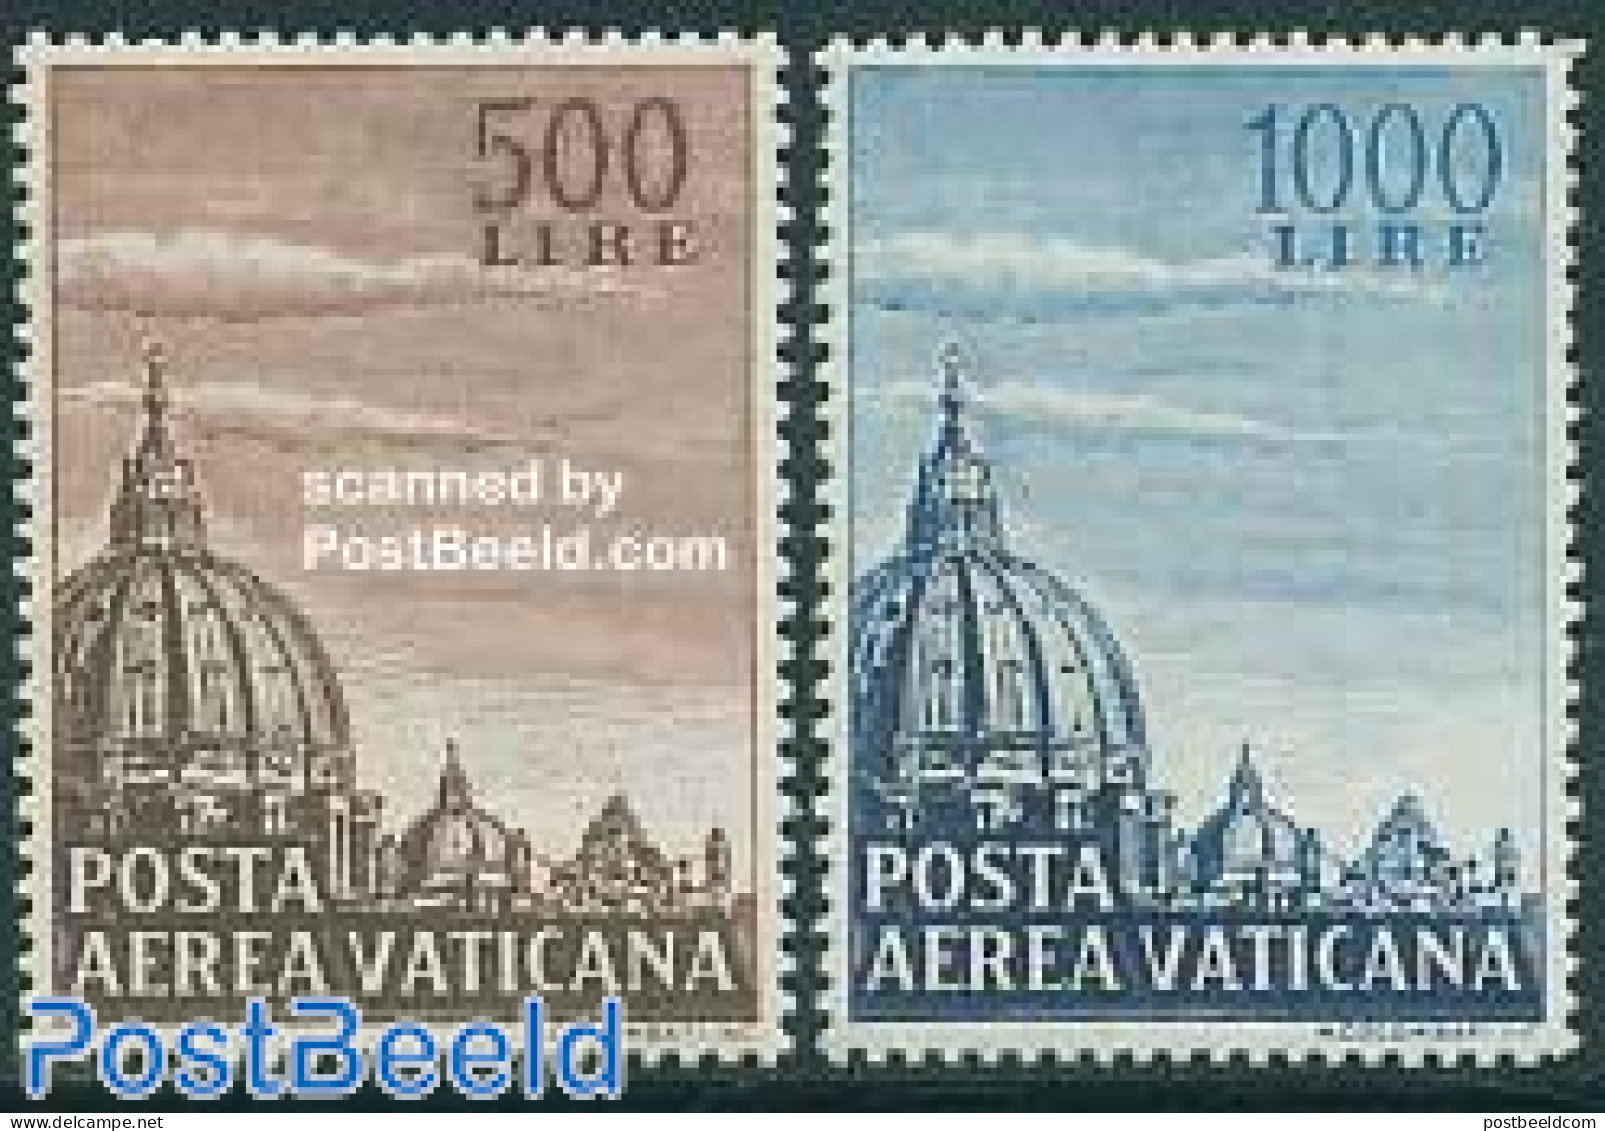 Vatican 1953 Airmail Definitives 2v, Unused (hinged), Religion - Churches, Temples, Mosques, Synagogues - Nuevos